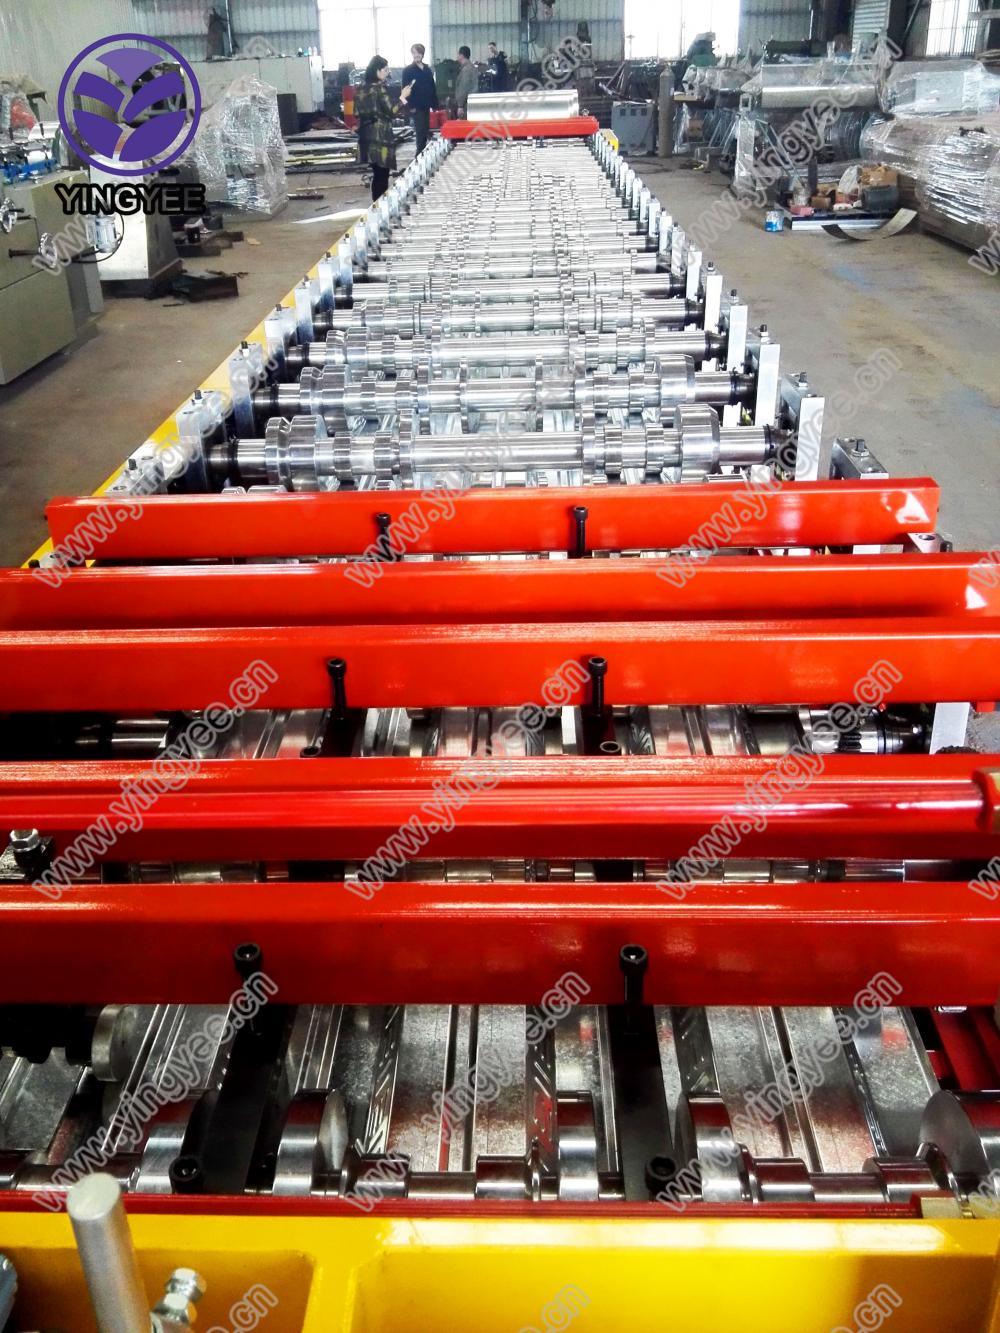 High Quality Deck Roll Forming Machine From Yingyee20